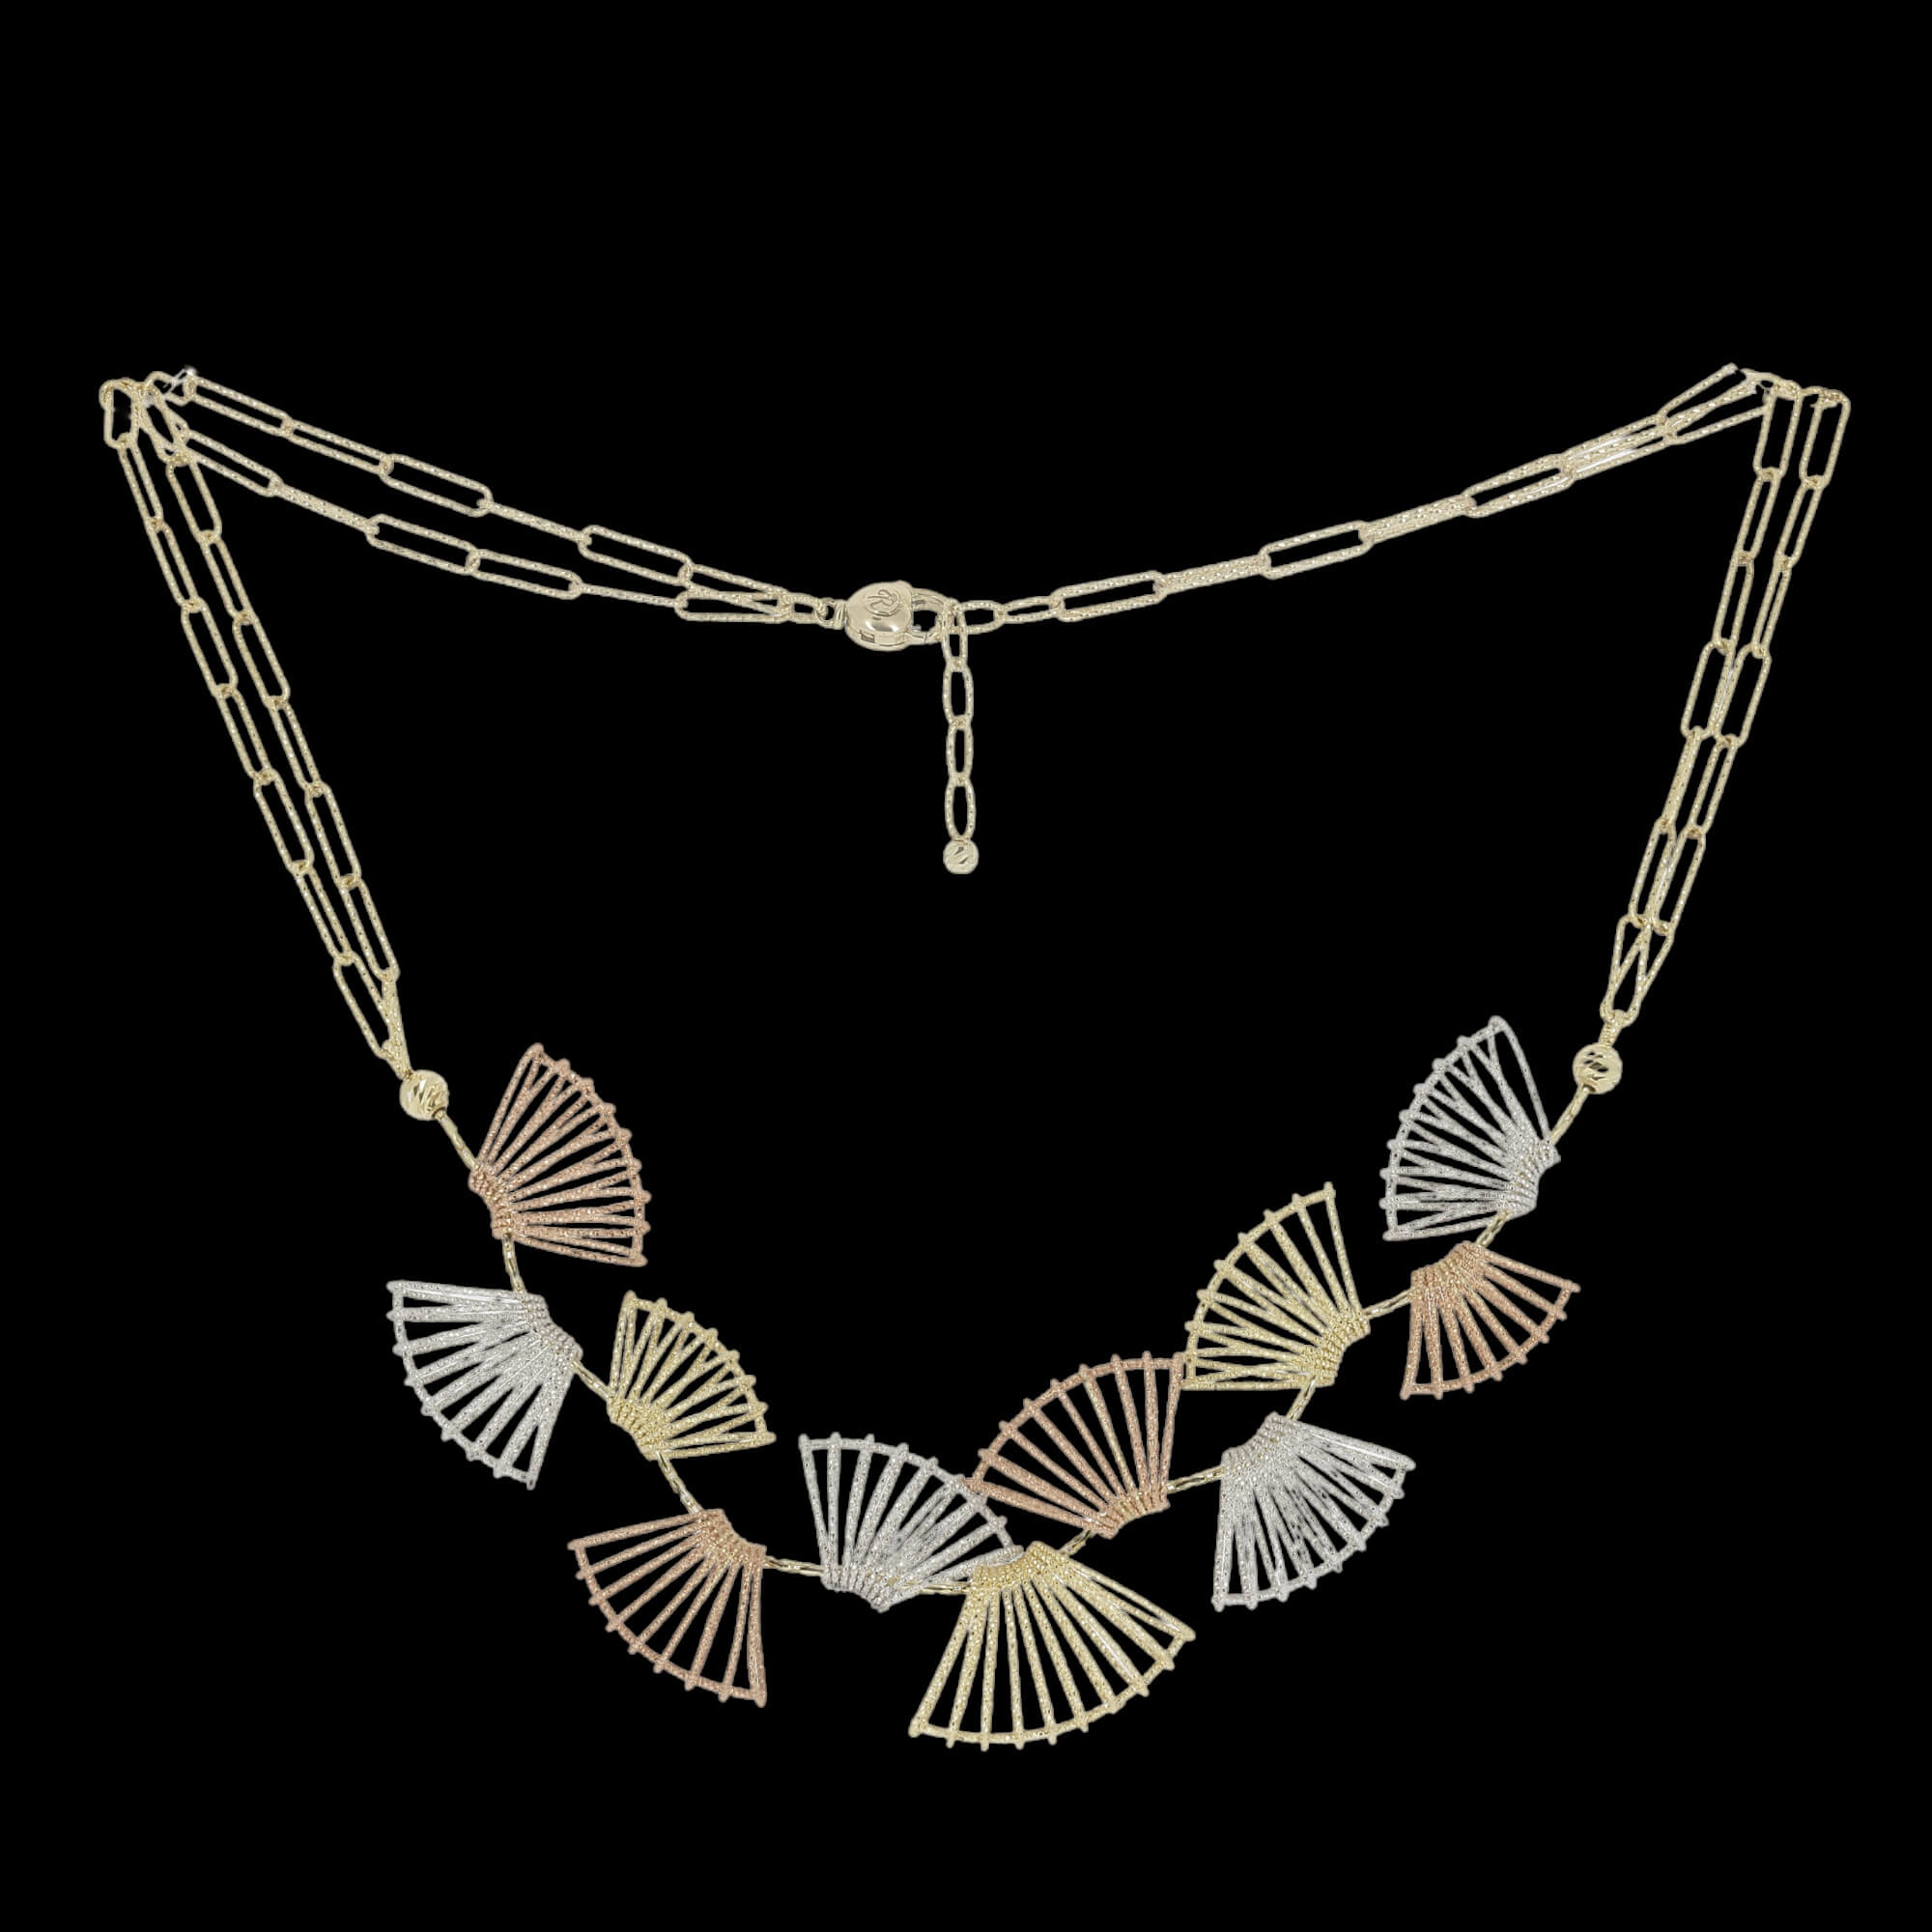 Gold three-color necklace made of 18kt gold, 11 elements